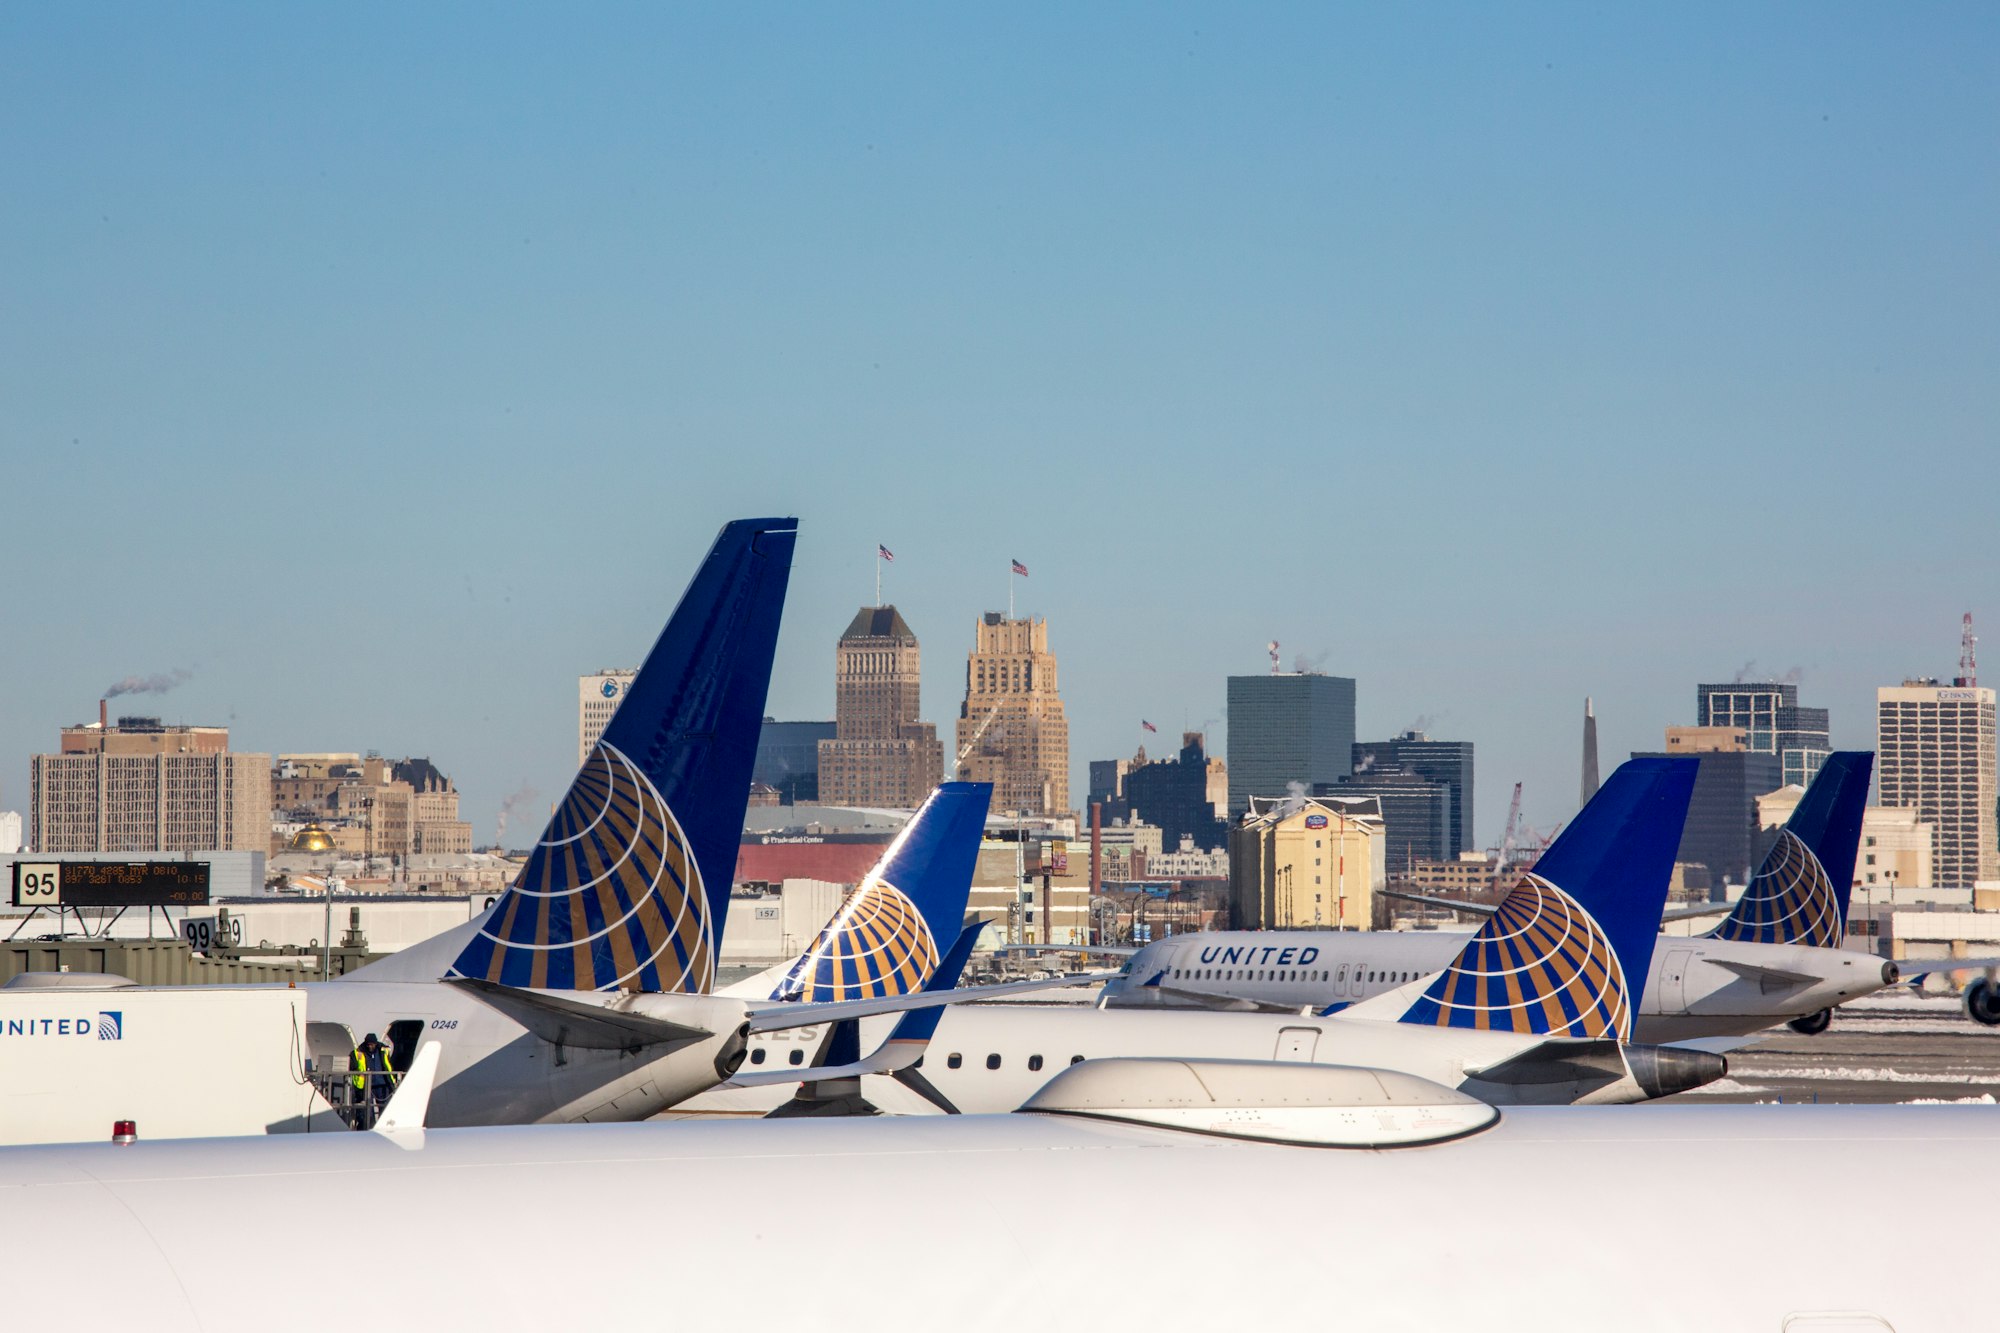 United Airlines is streamlining some of its processes with the help of AI